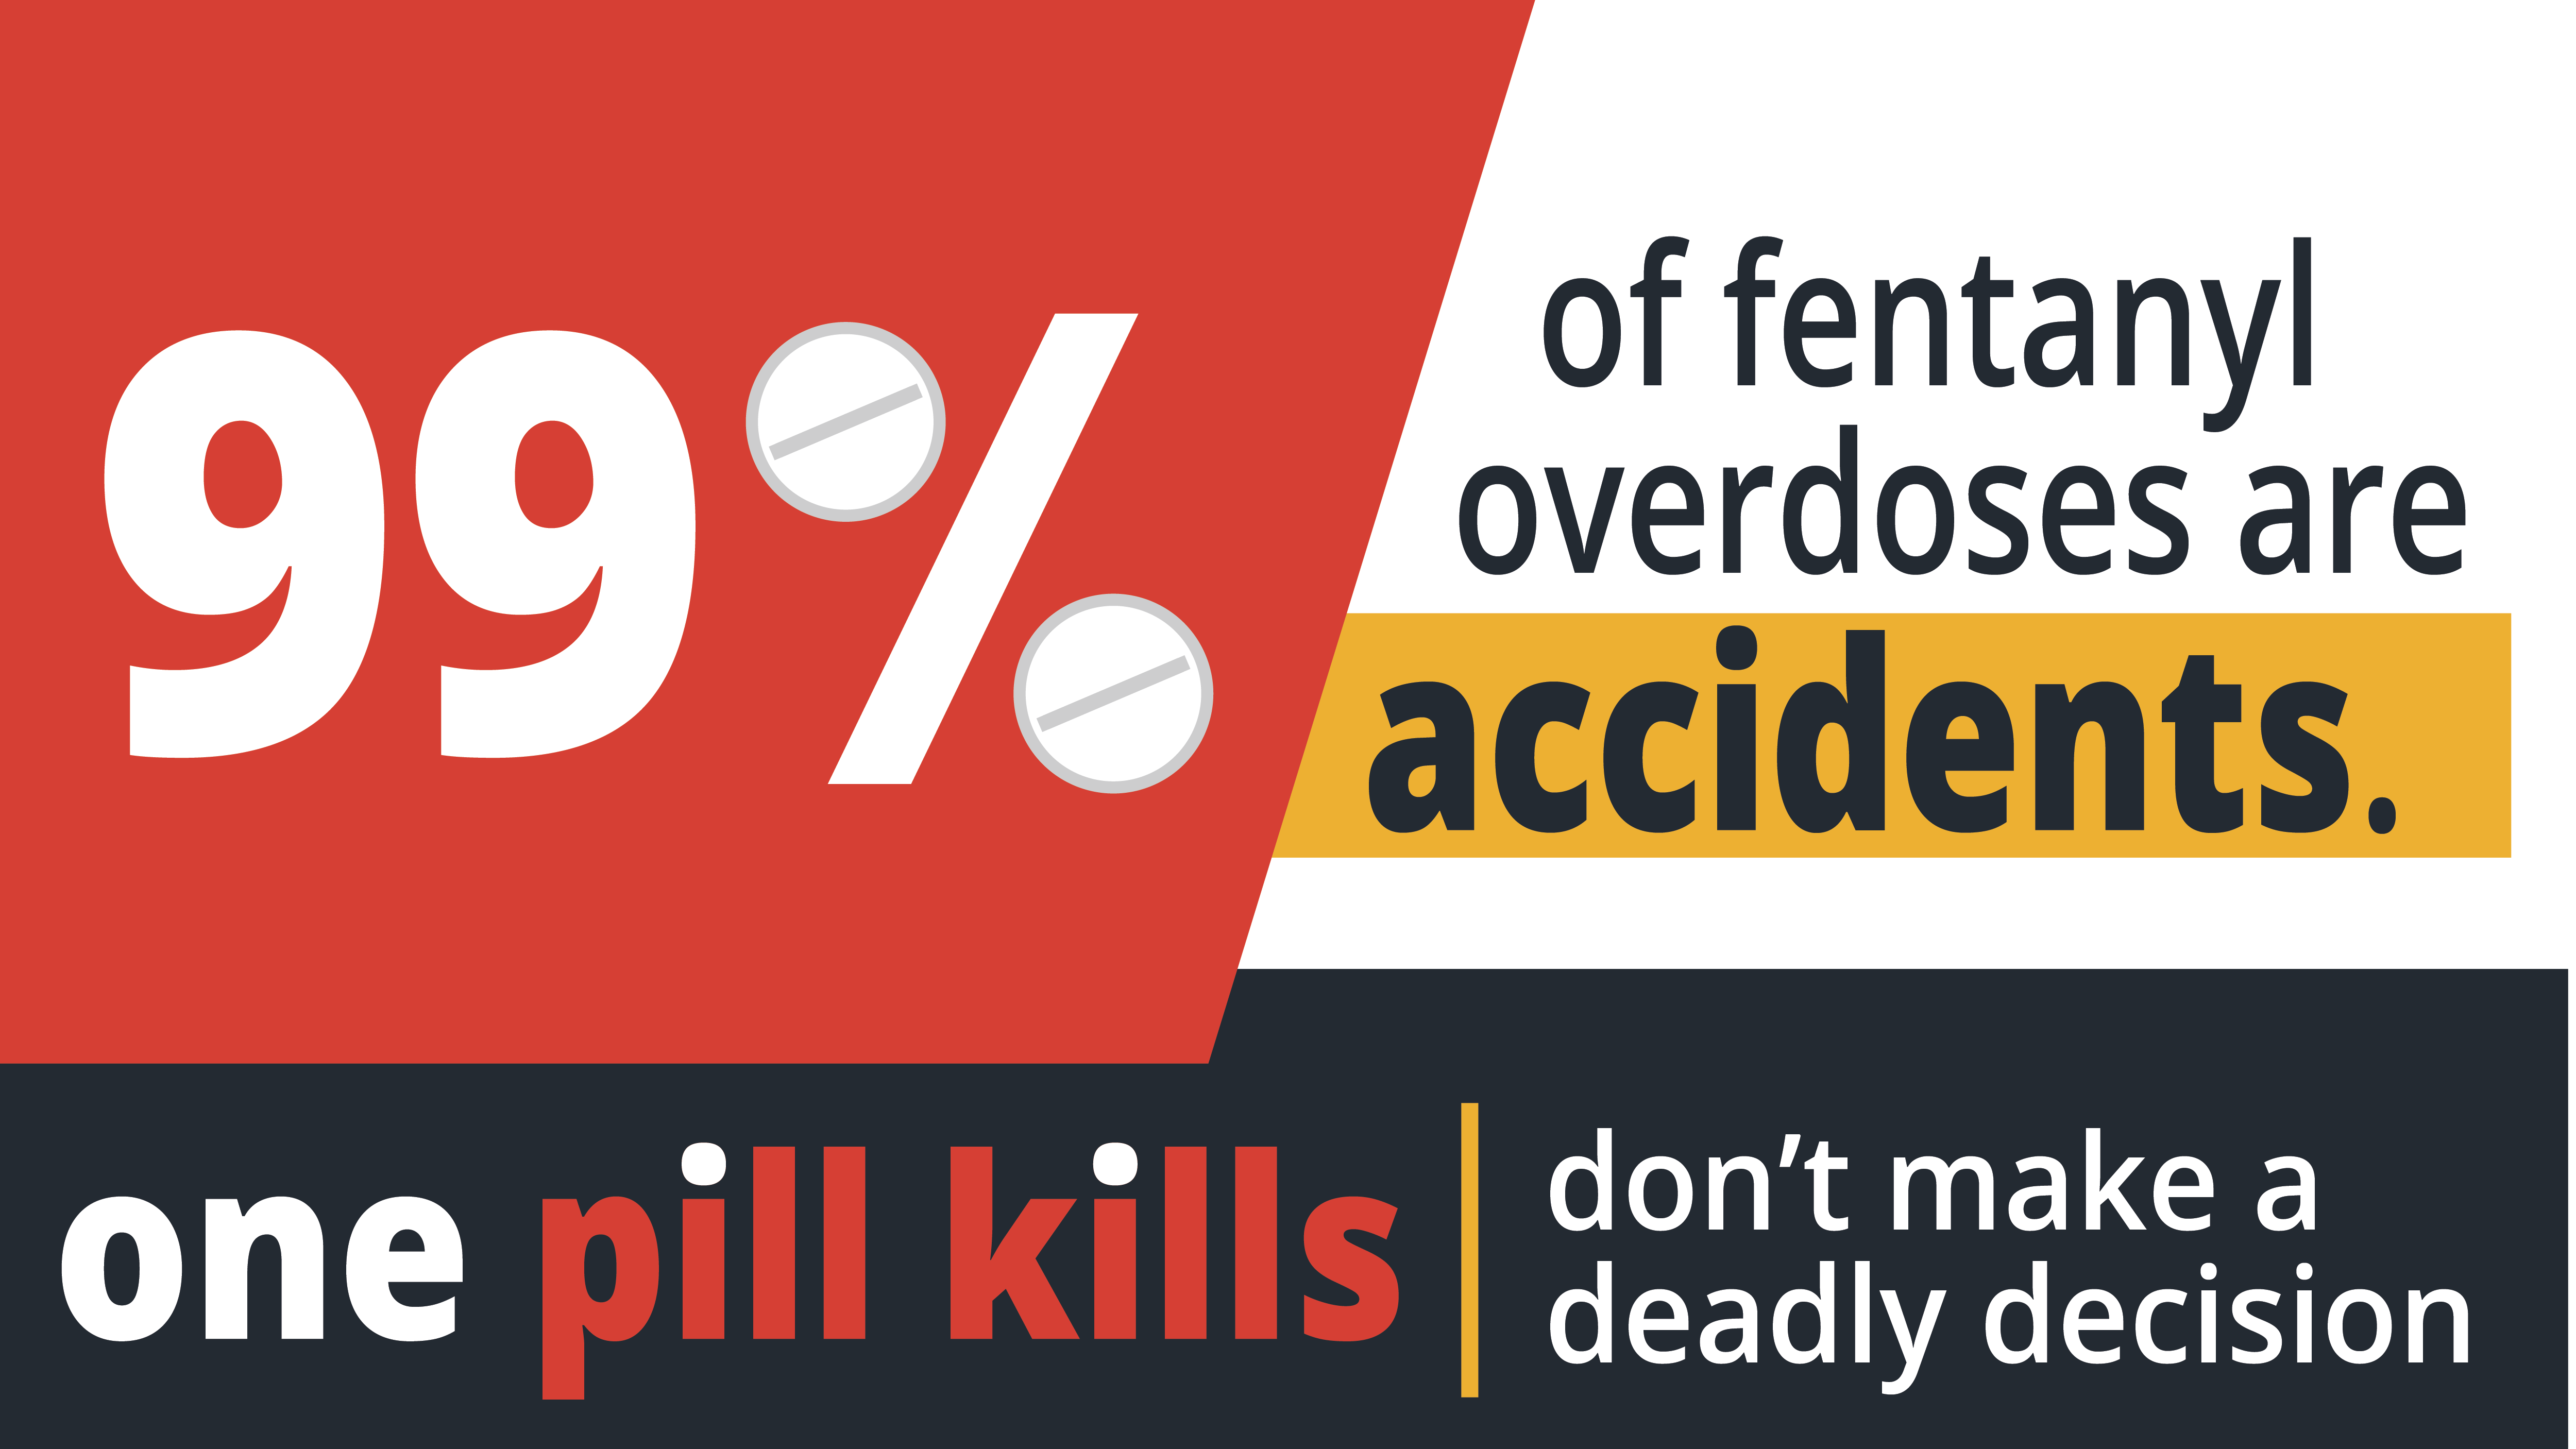 99% of fentanyl overdoes are accidents. One pill kills. Don't make a deadly decision